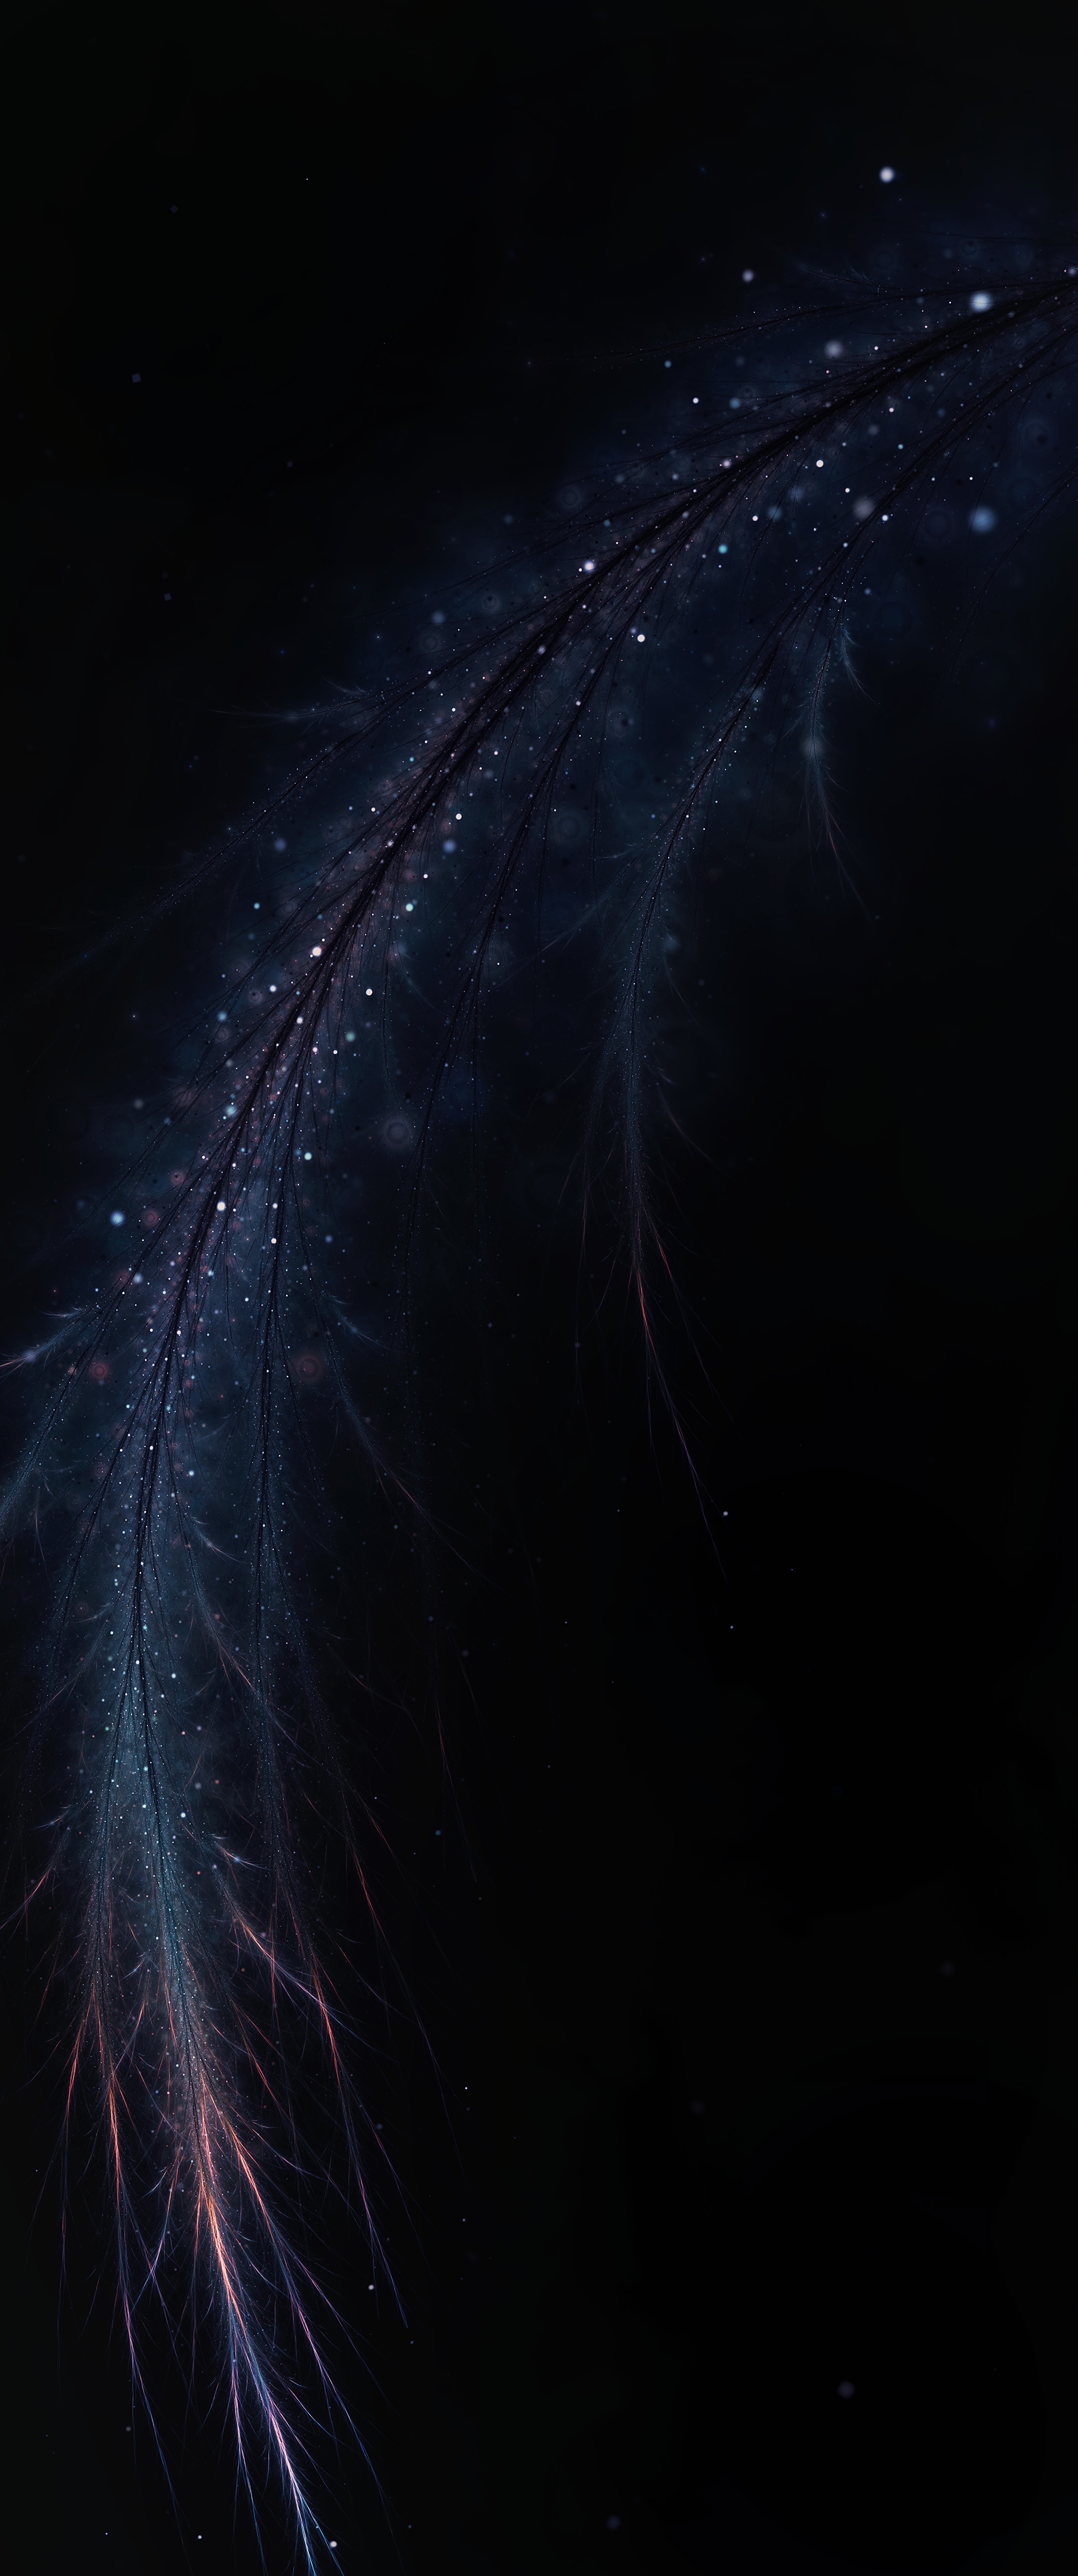 dark, abstract, feather, fractal, shine, brilliance, branch, pen mobile wallpaper